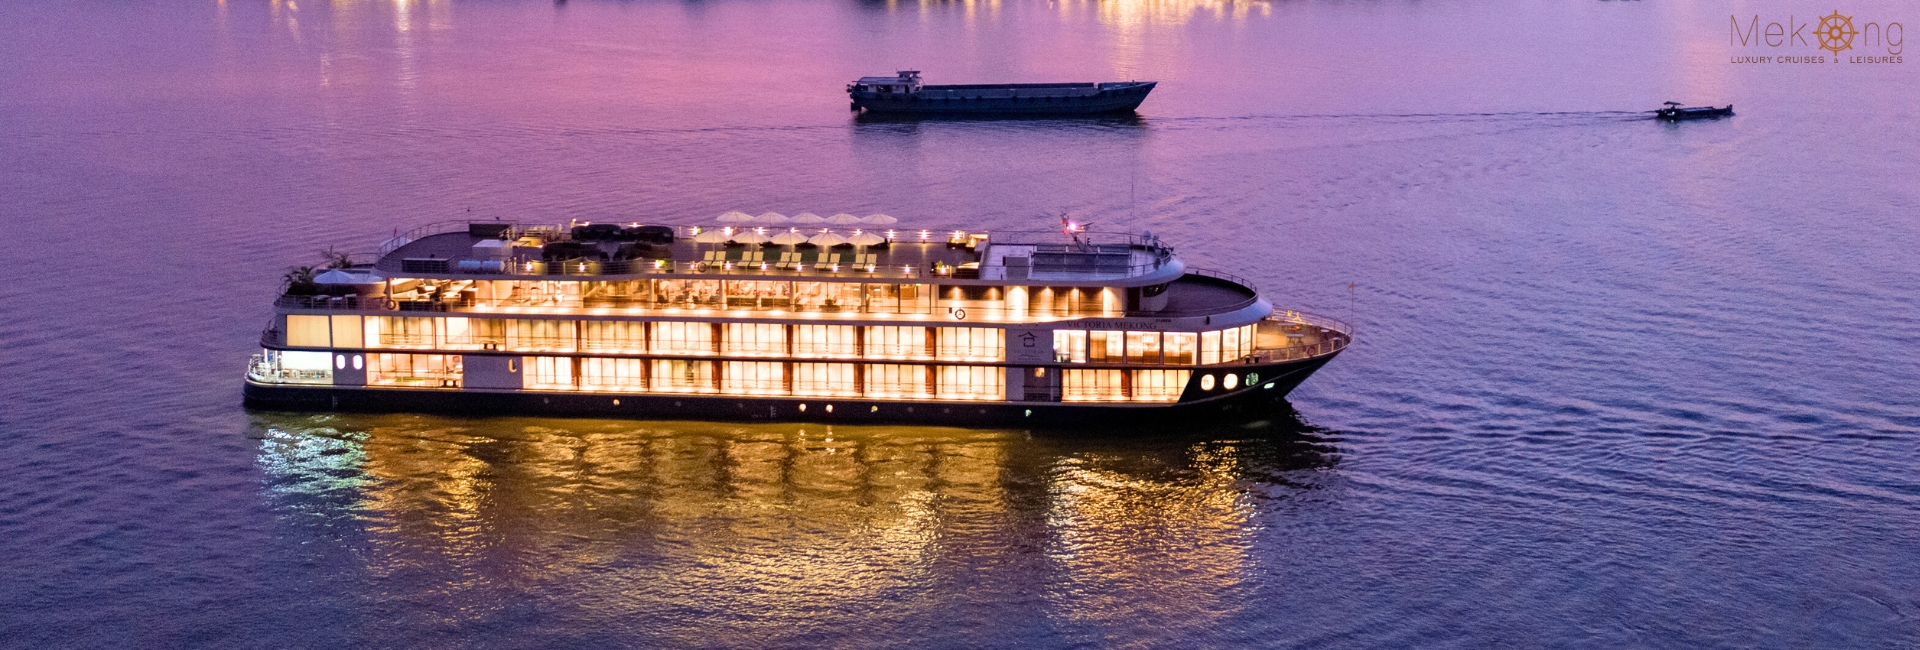 Charming Victoria Mekong Cruise by night